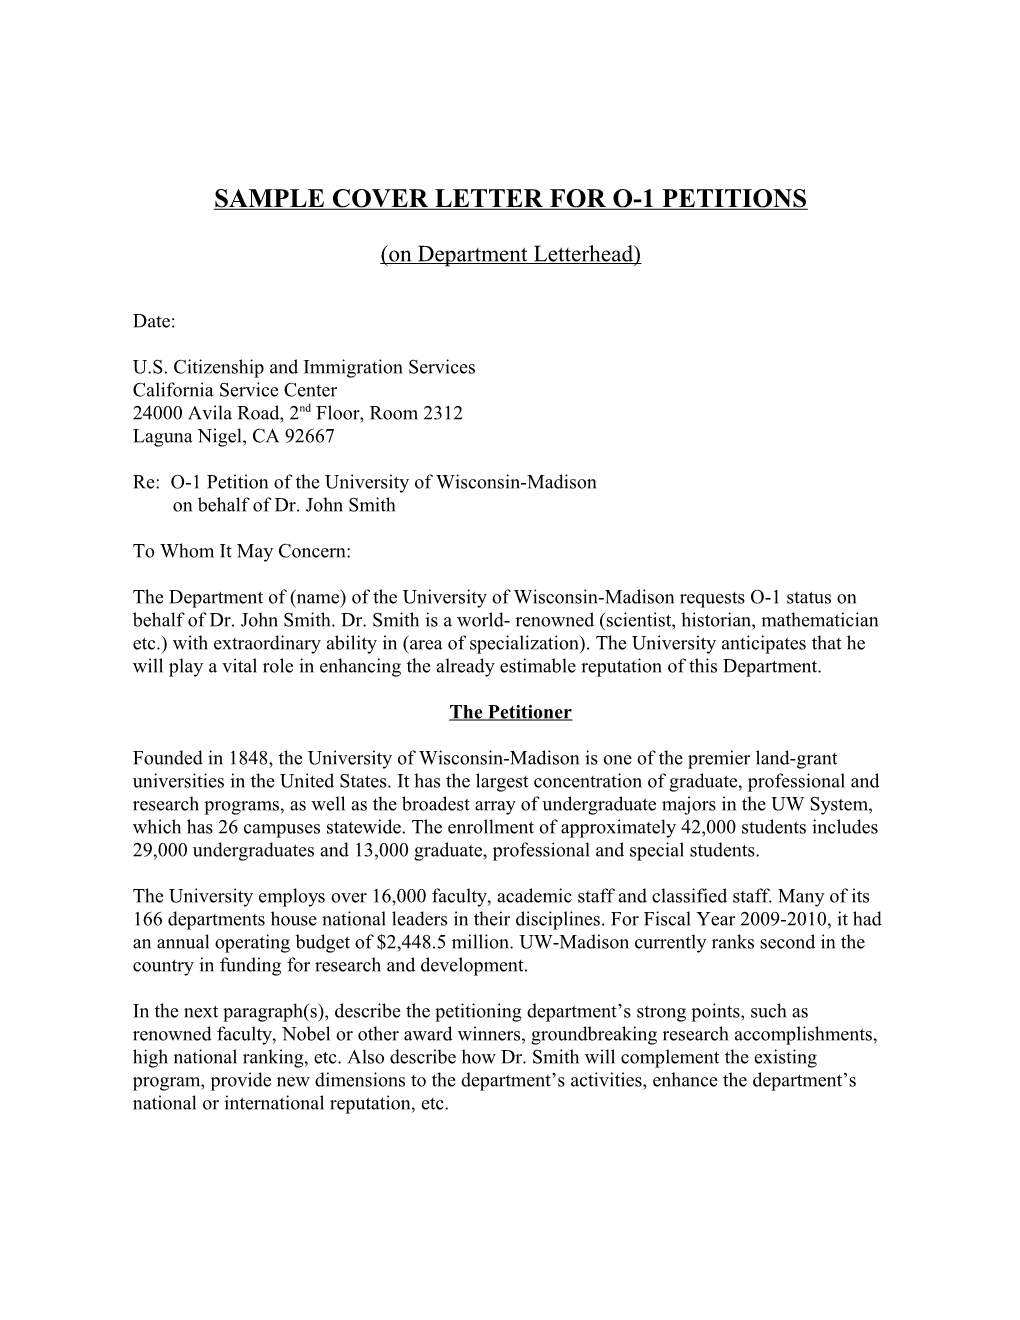 Sample Cover Letter for O-1 Petitions